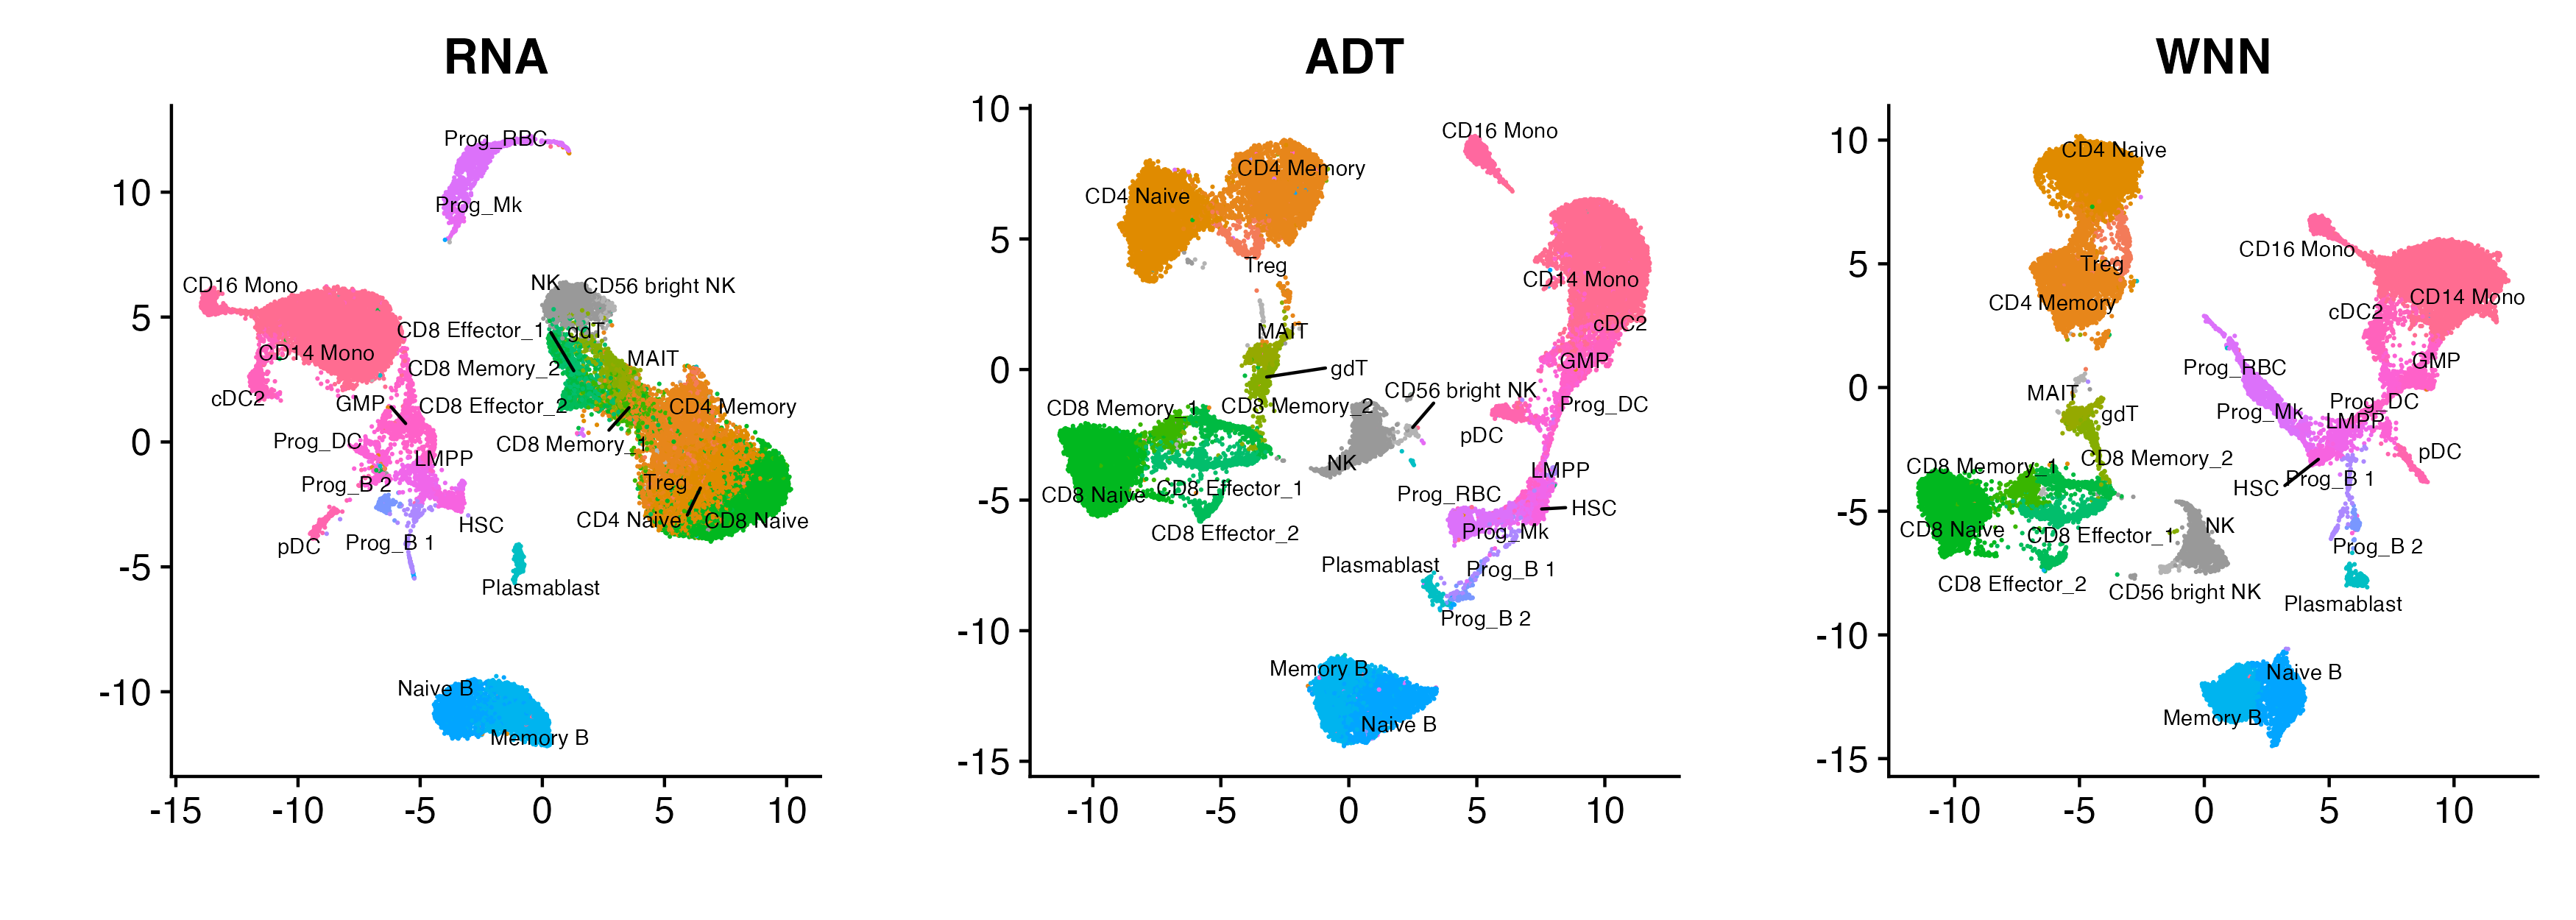 UMAPs of the RNA modality (left), ADT modality (middle), or WNN (right, which combines the information in the RNA and ADT)